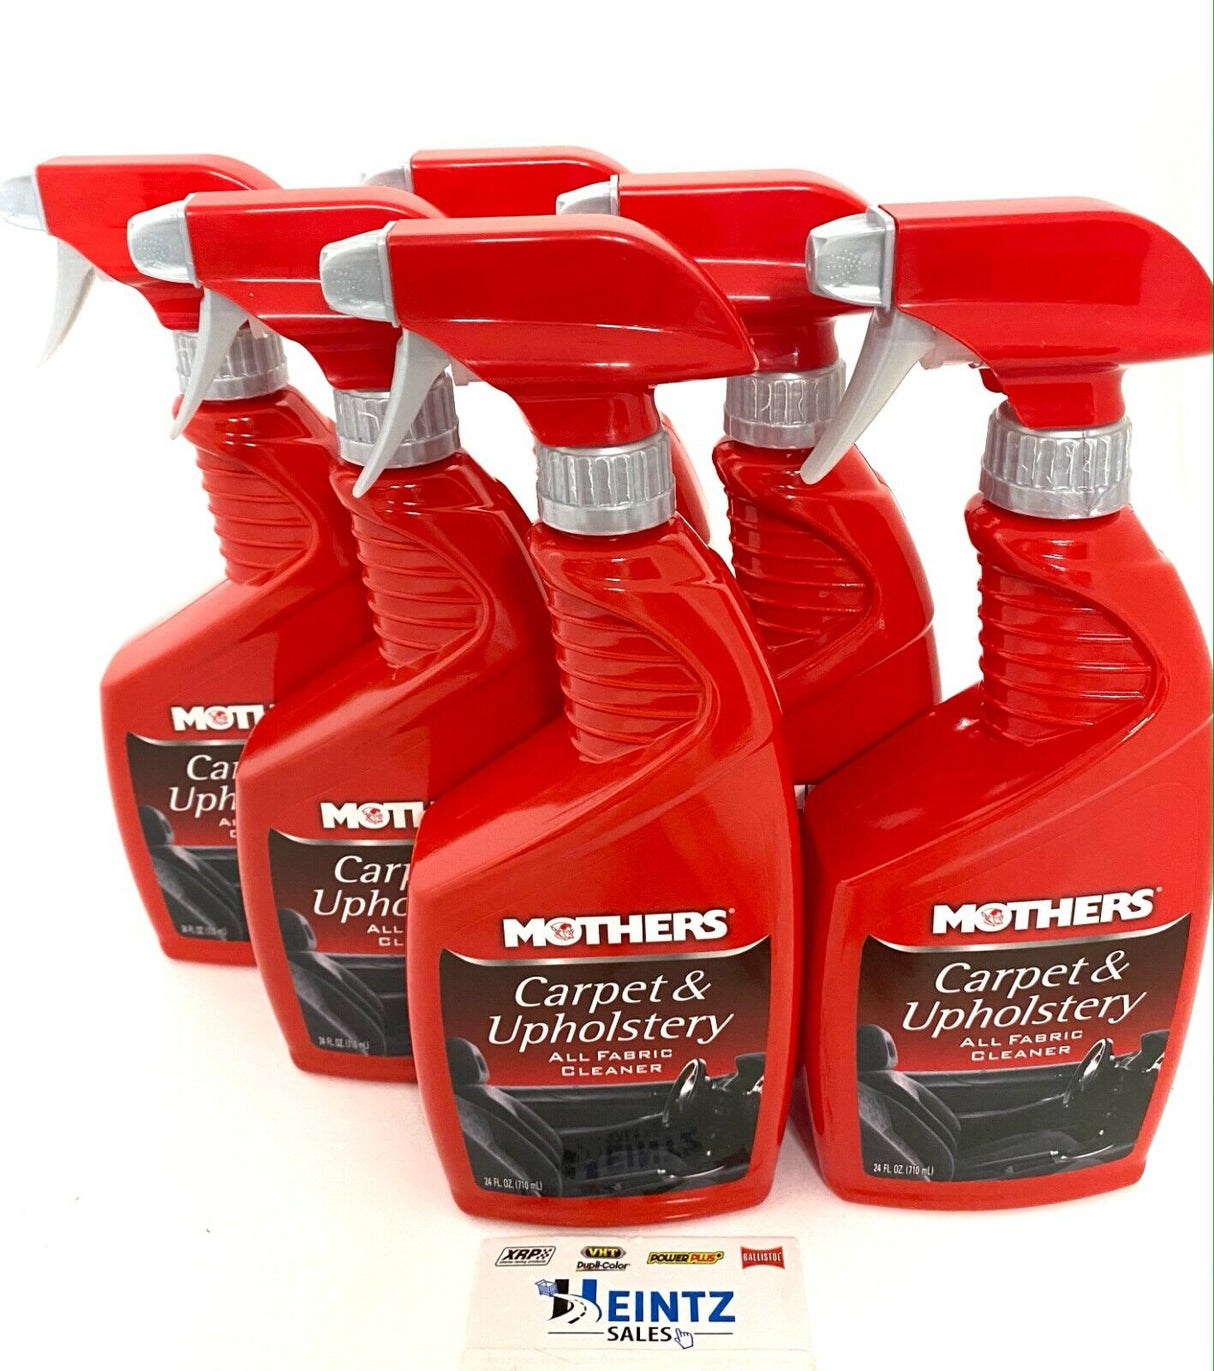 MOTHERS 05424 Carpet & Upholstery 6 PACK - All Fabric Cleaner - Vinyl - Cloth - 24 fl. oz.